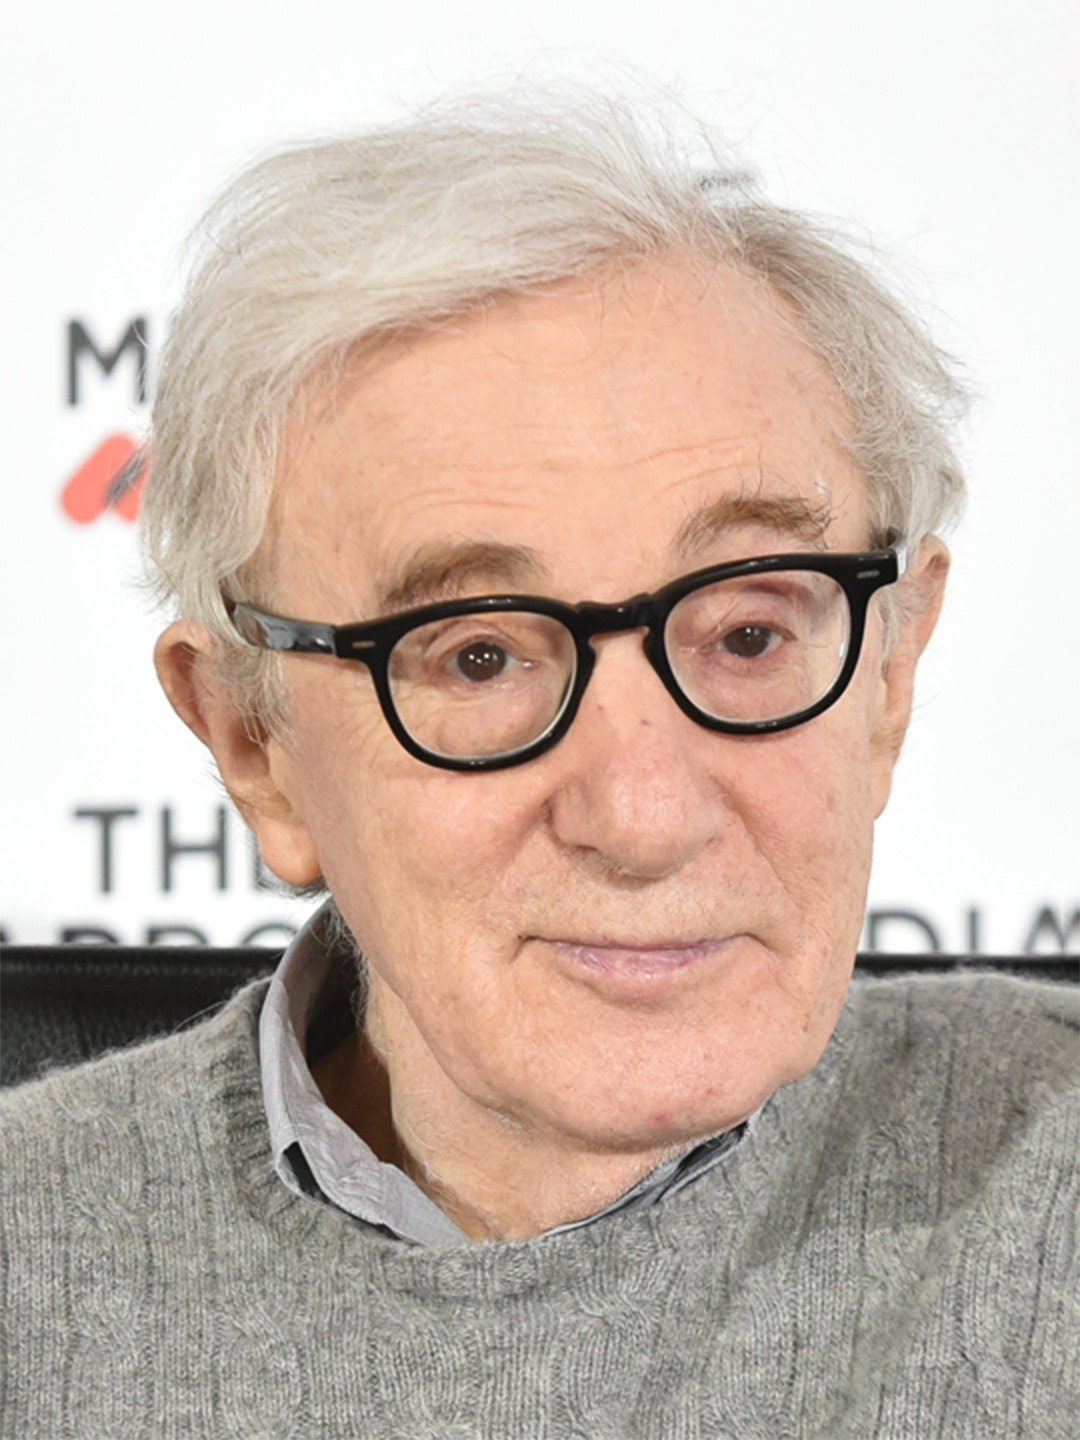 Woody Allen, master filmmaker mired in controversy, announces retirement